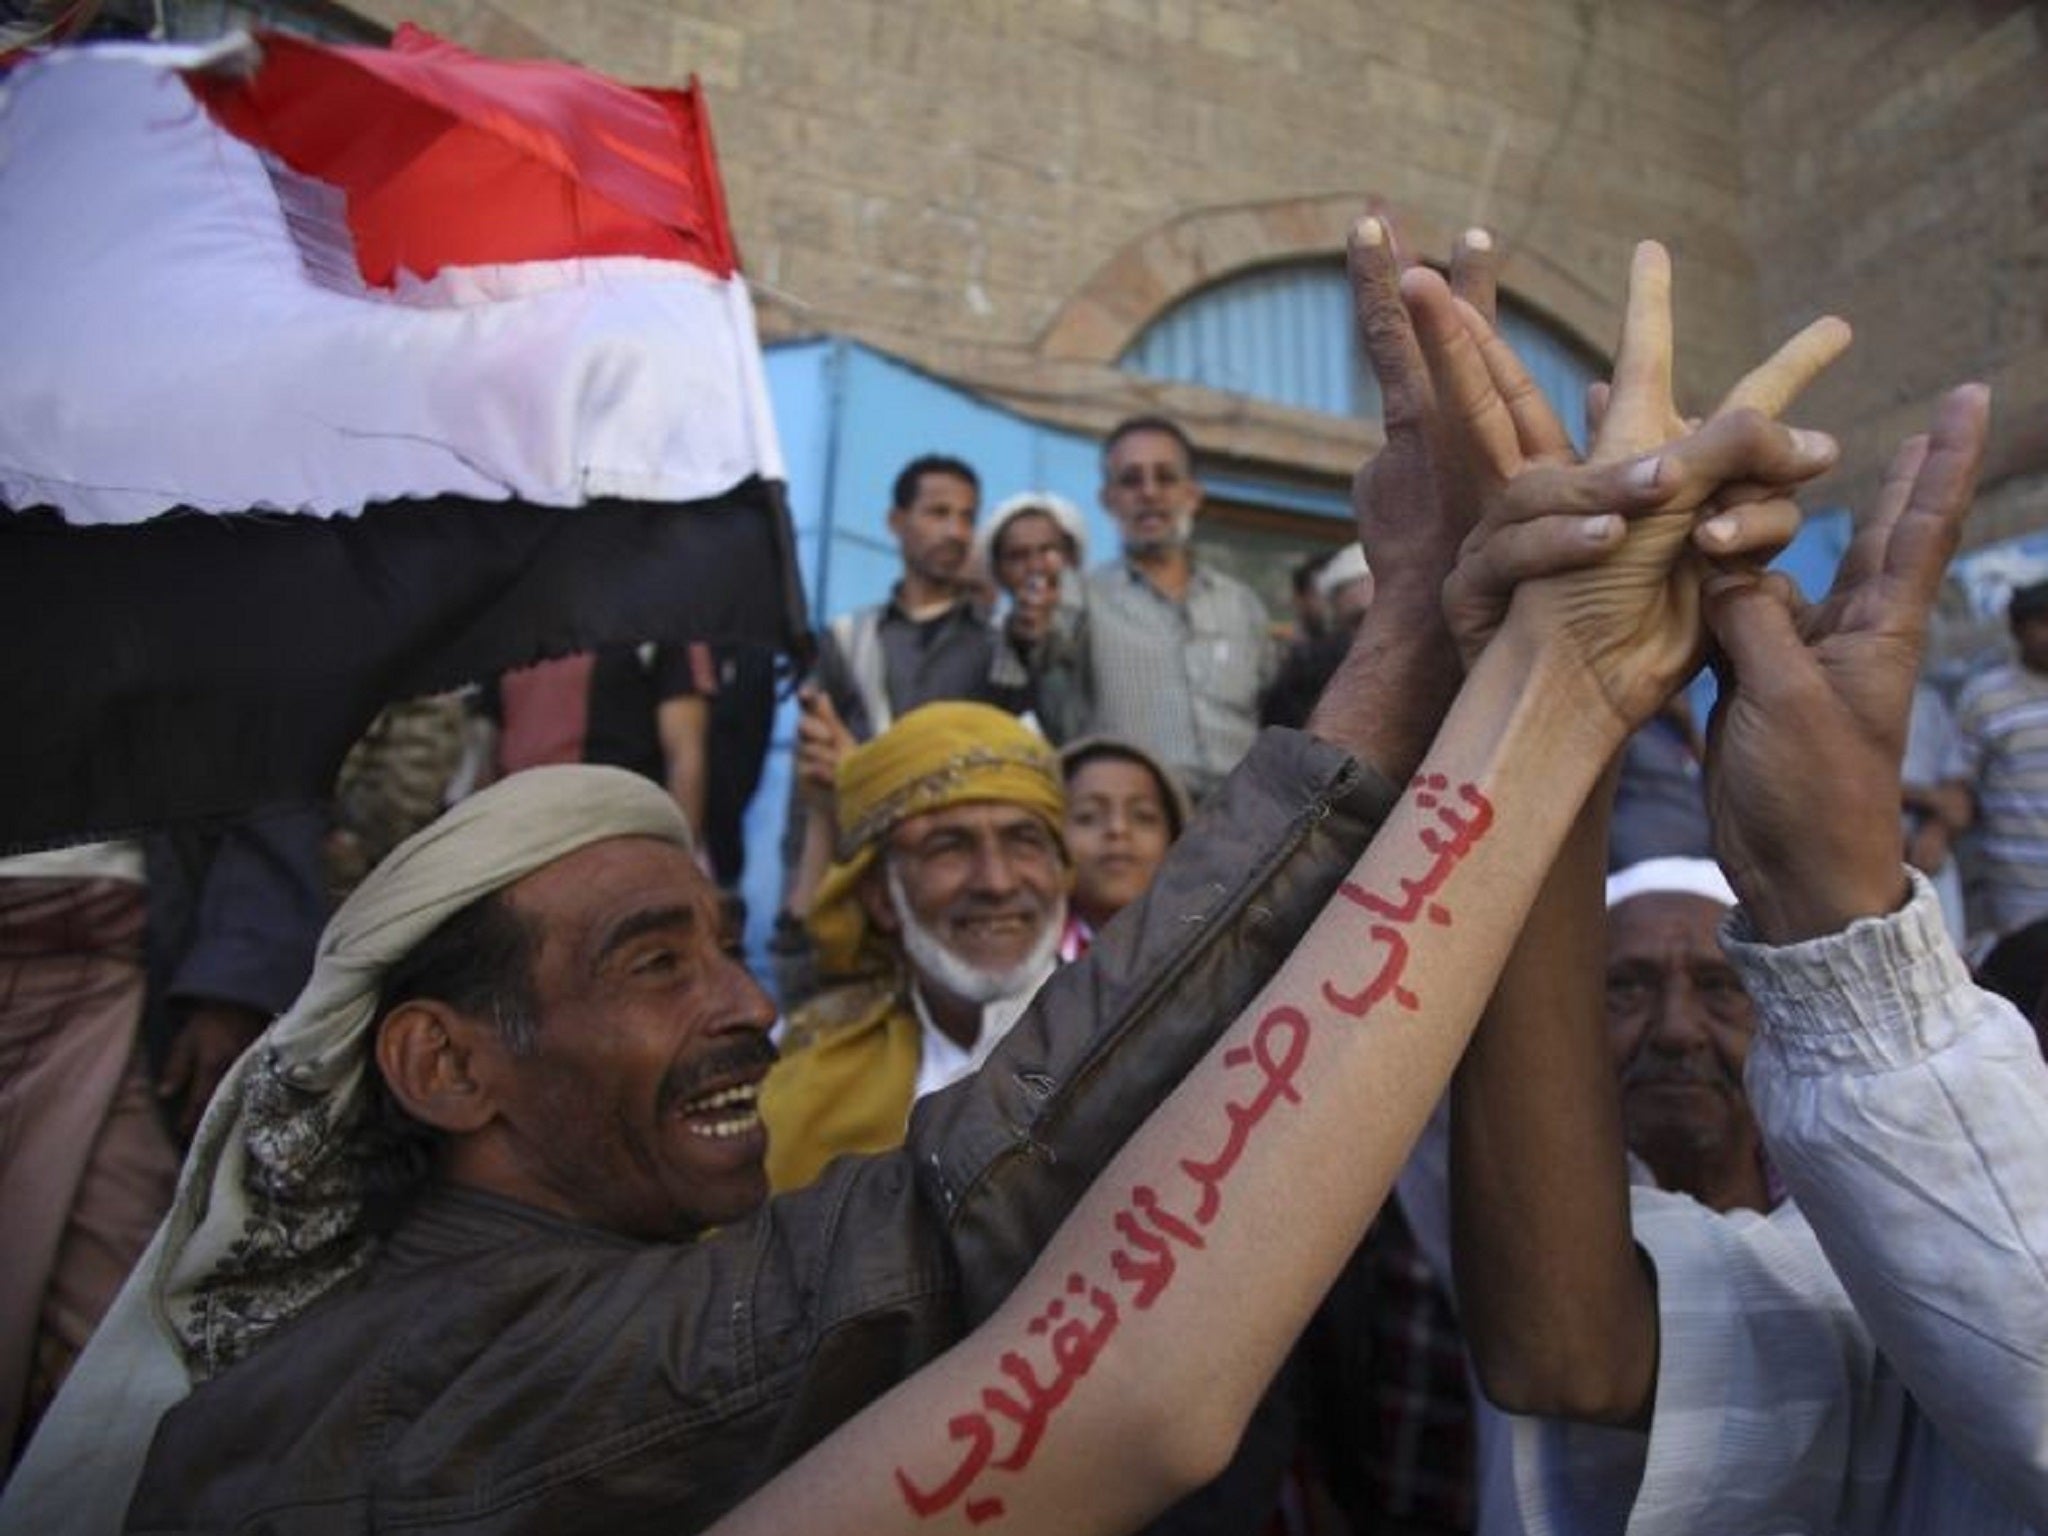 Yemenis rallying against the Houthi takeover and dissolution of parliament